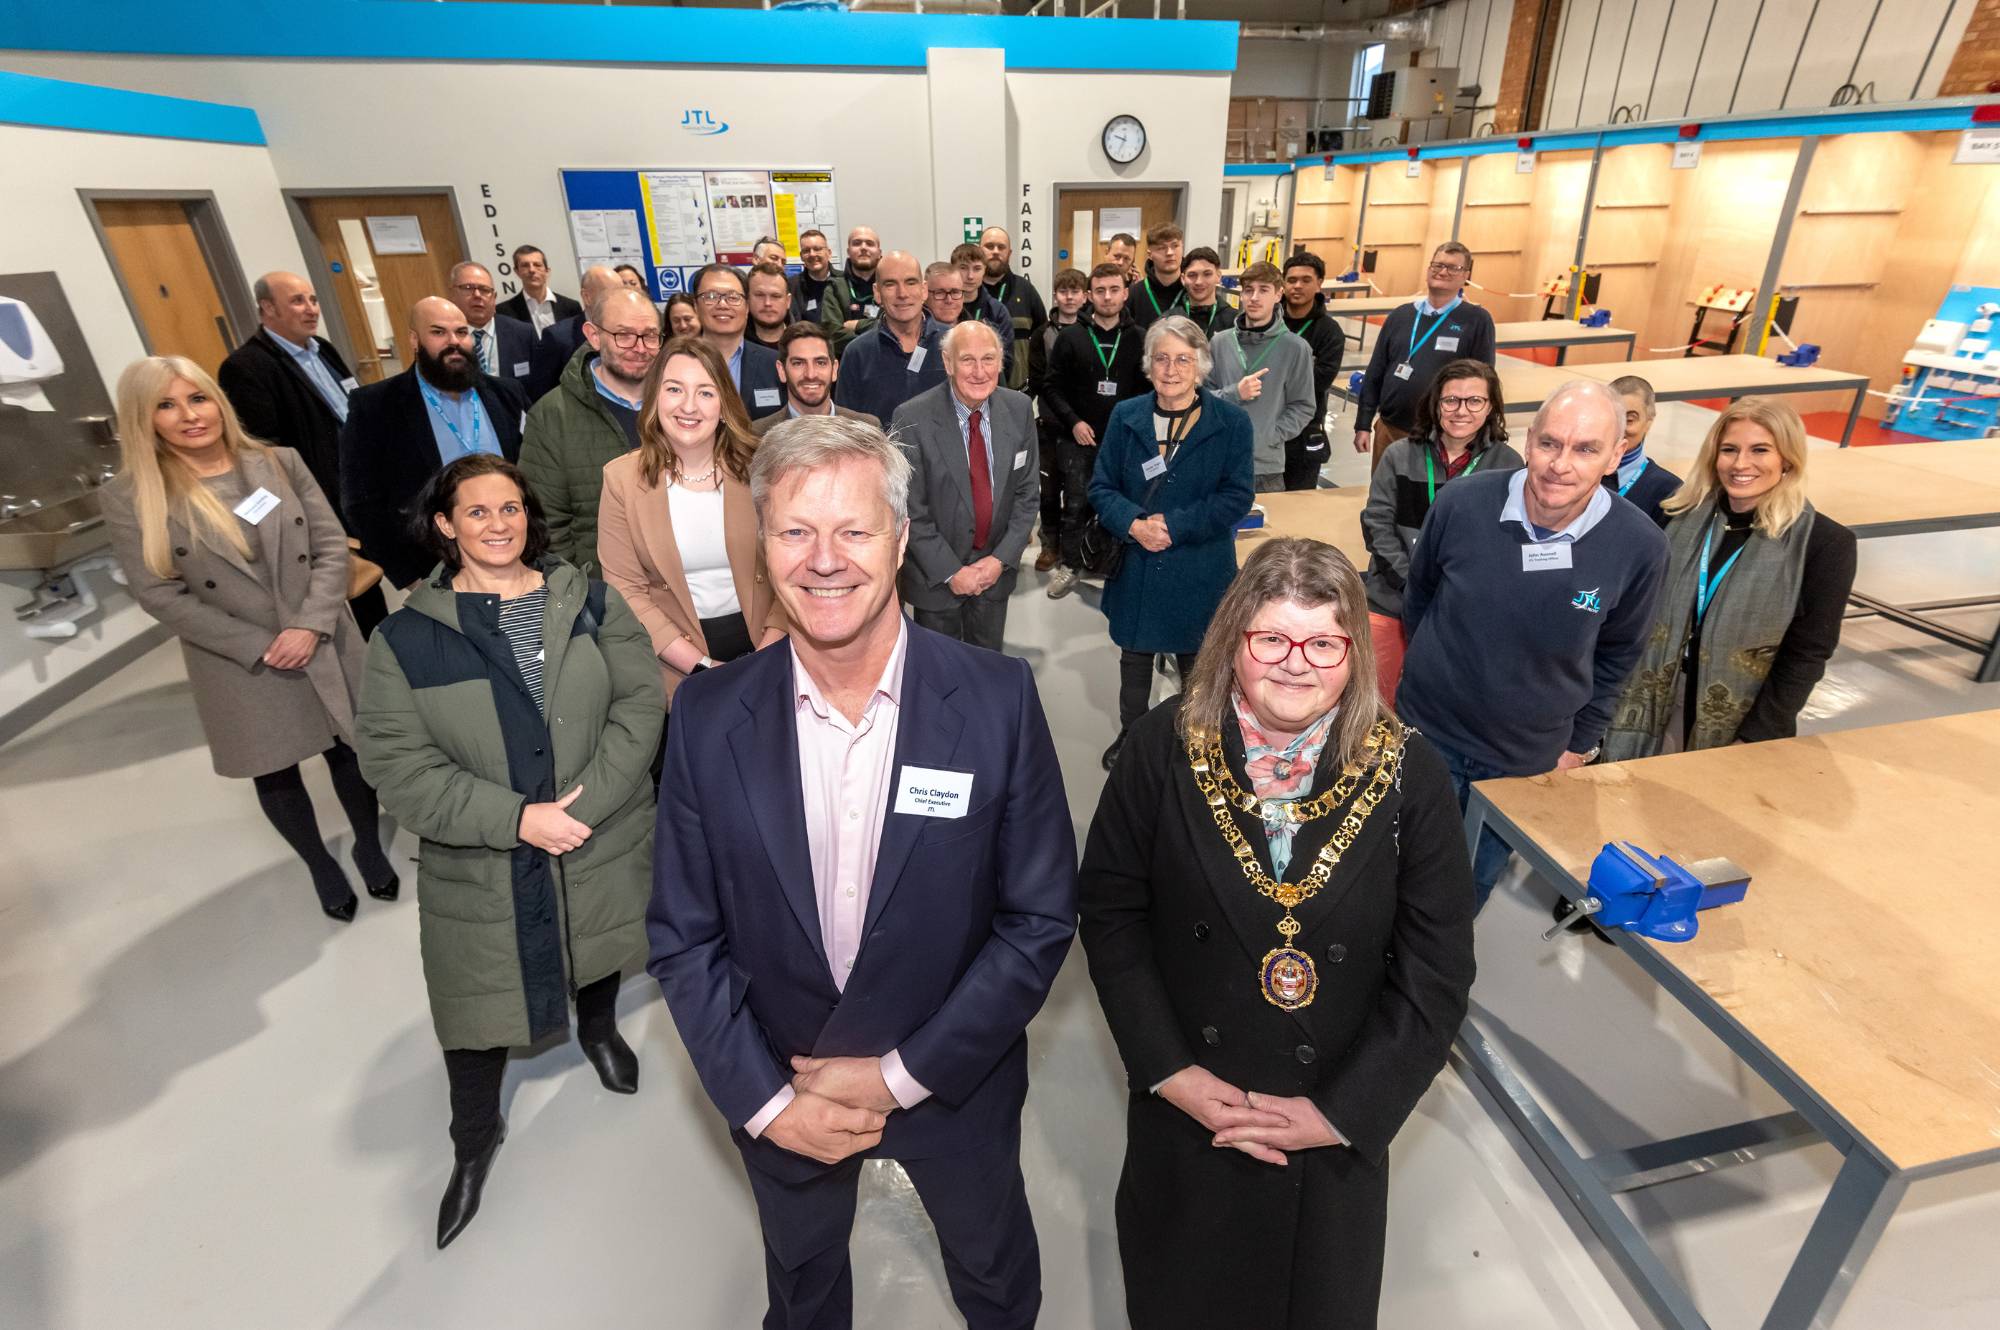 JTL opens new training centre in Eastbourne during National Apprenticeship Week